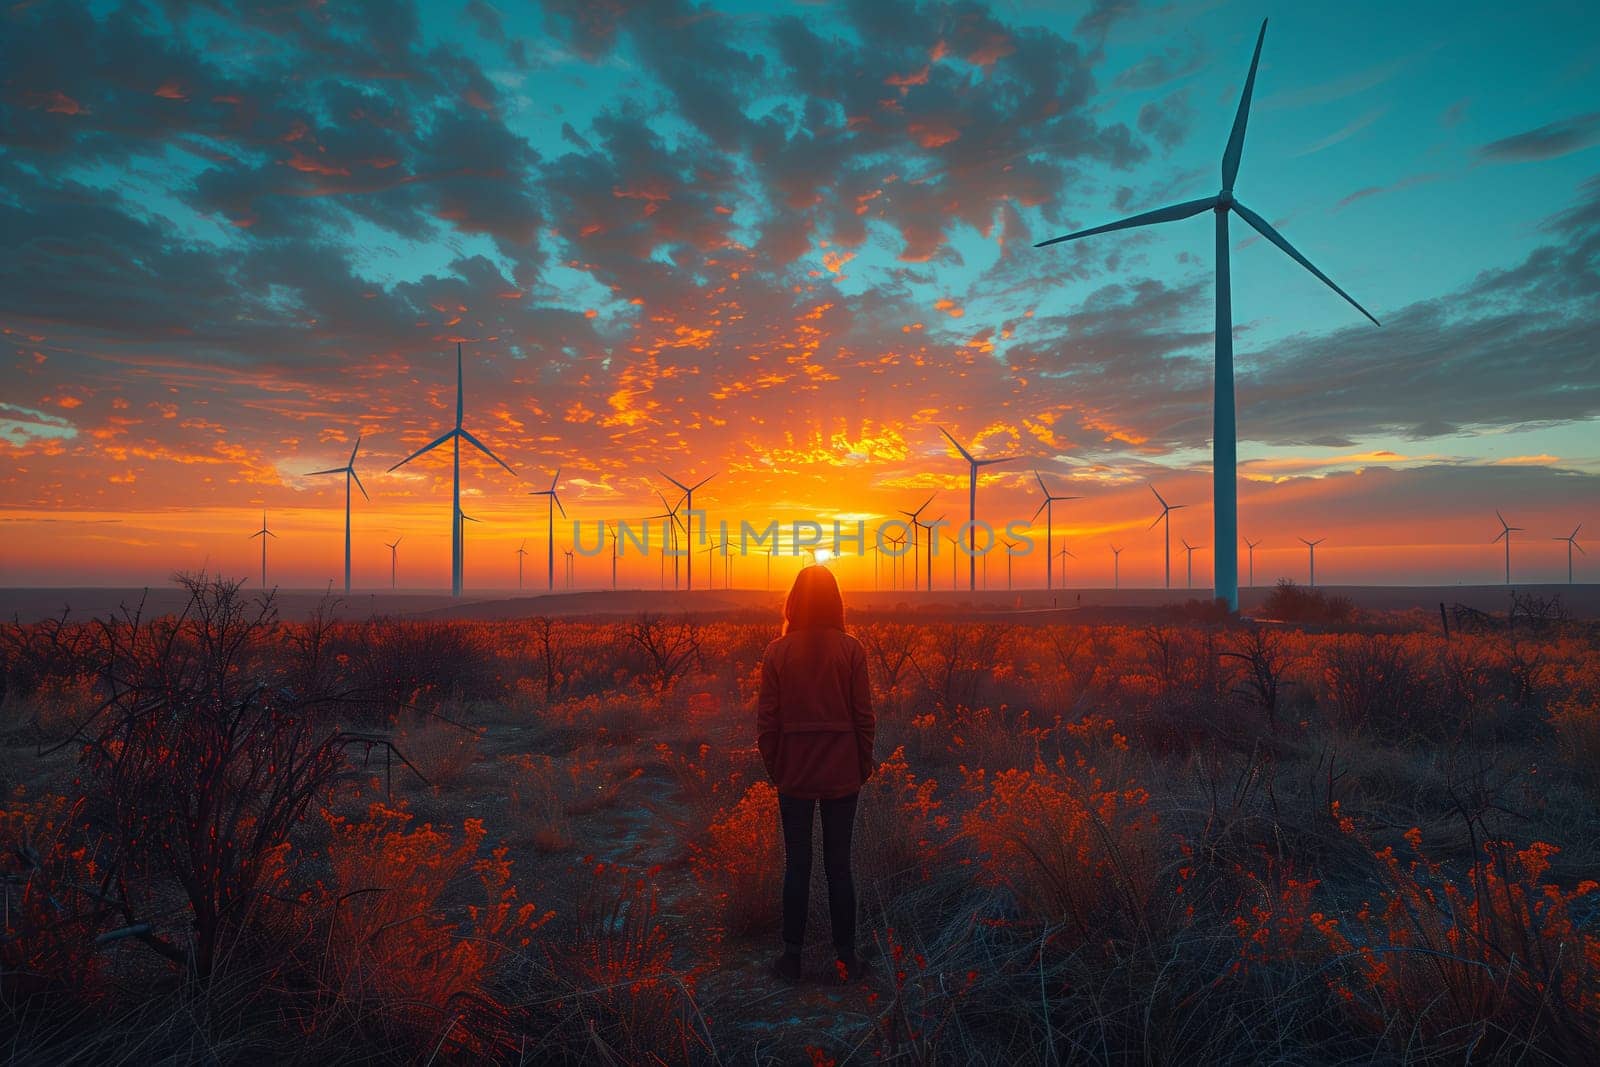 A woman is surrounded by wind turbines in a natural landscape at sunset, with a red sky afterglow and orange lighting. The atmosphere is peaceful and filled with electricity